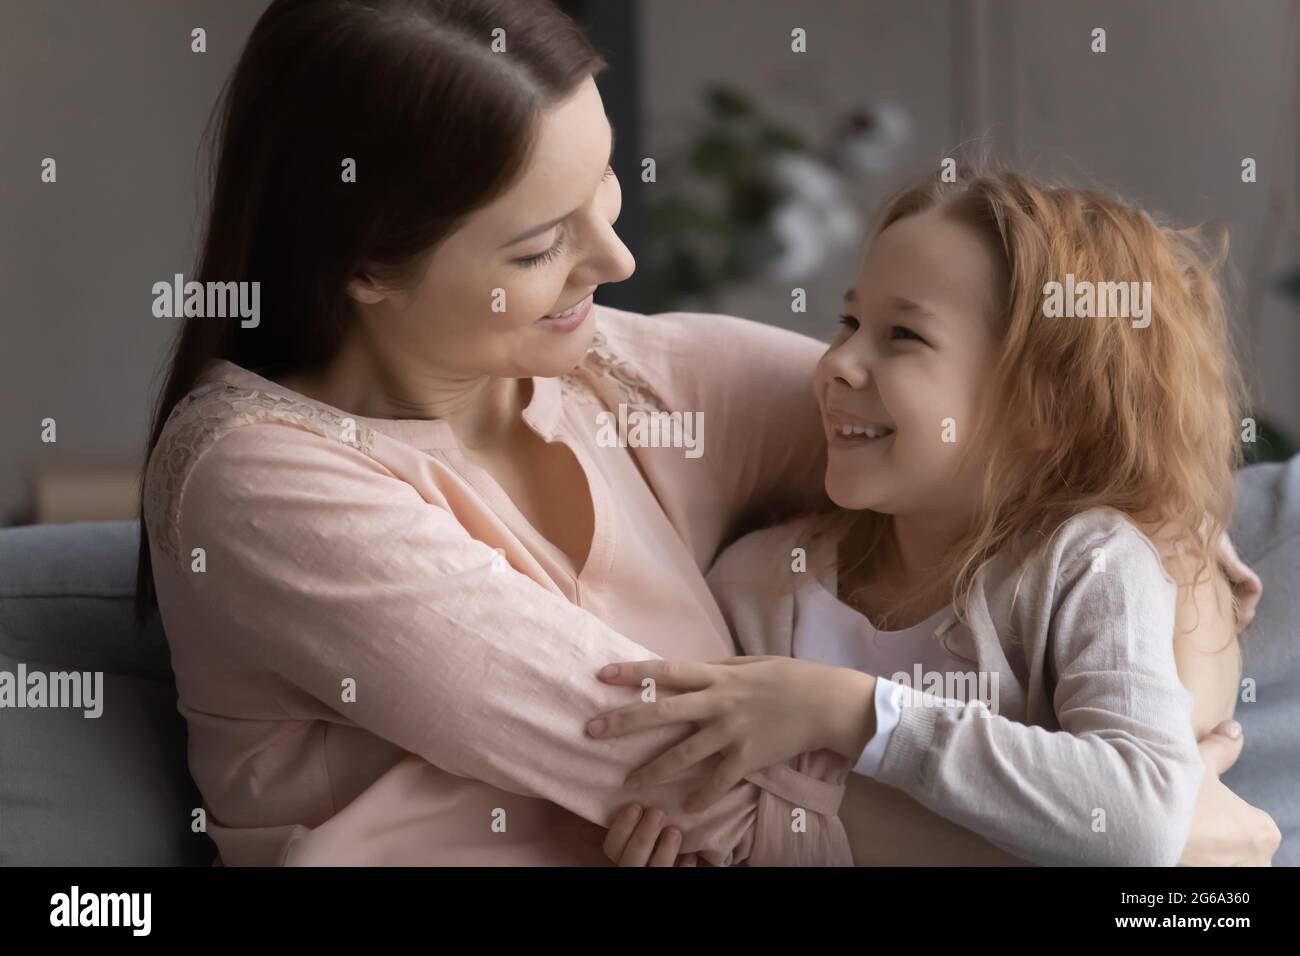 Caring foster mother embrace adopted child girl at living room Stock Photo